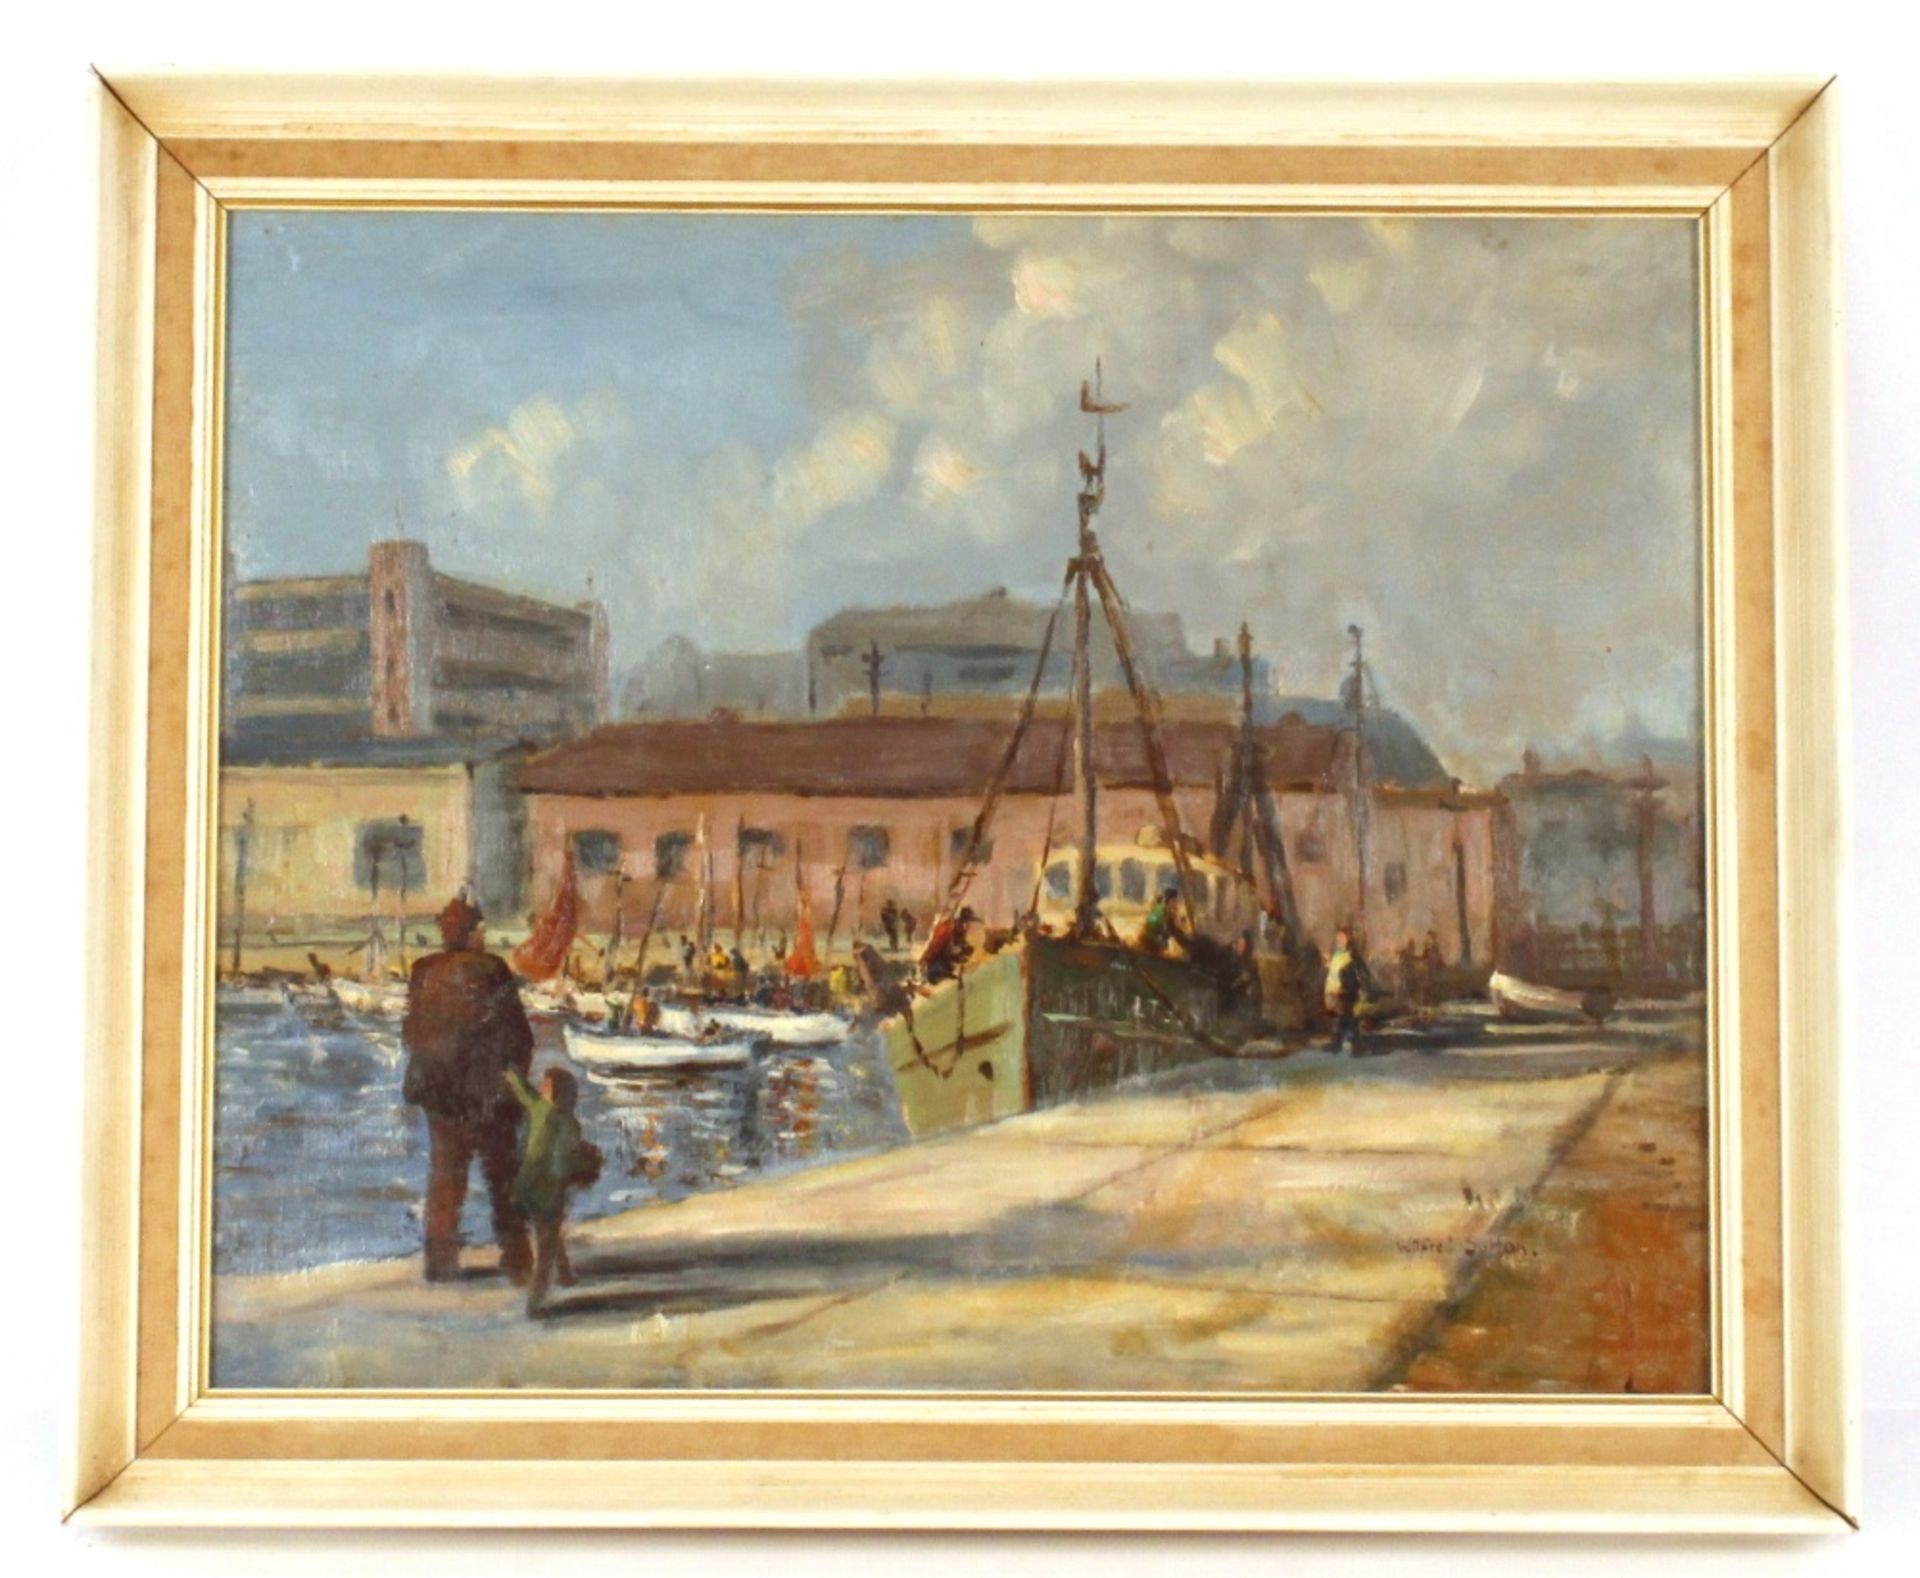 Wilfred Sutton, "Activity On The Merbreeze in Ham - Image 2 of 2